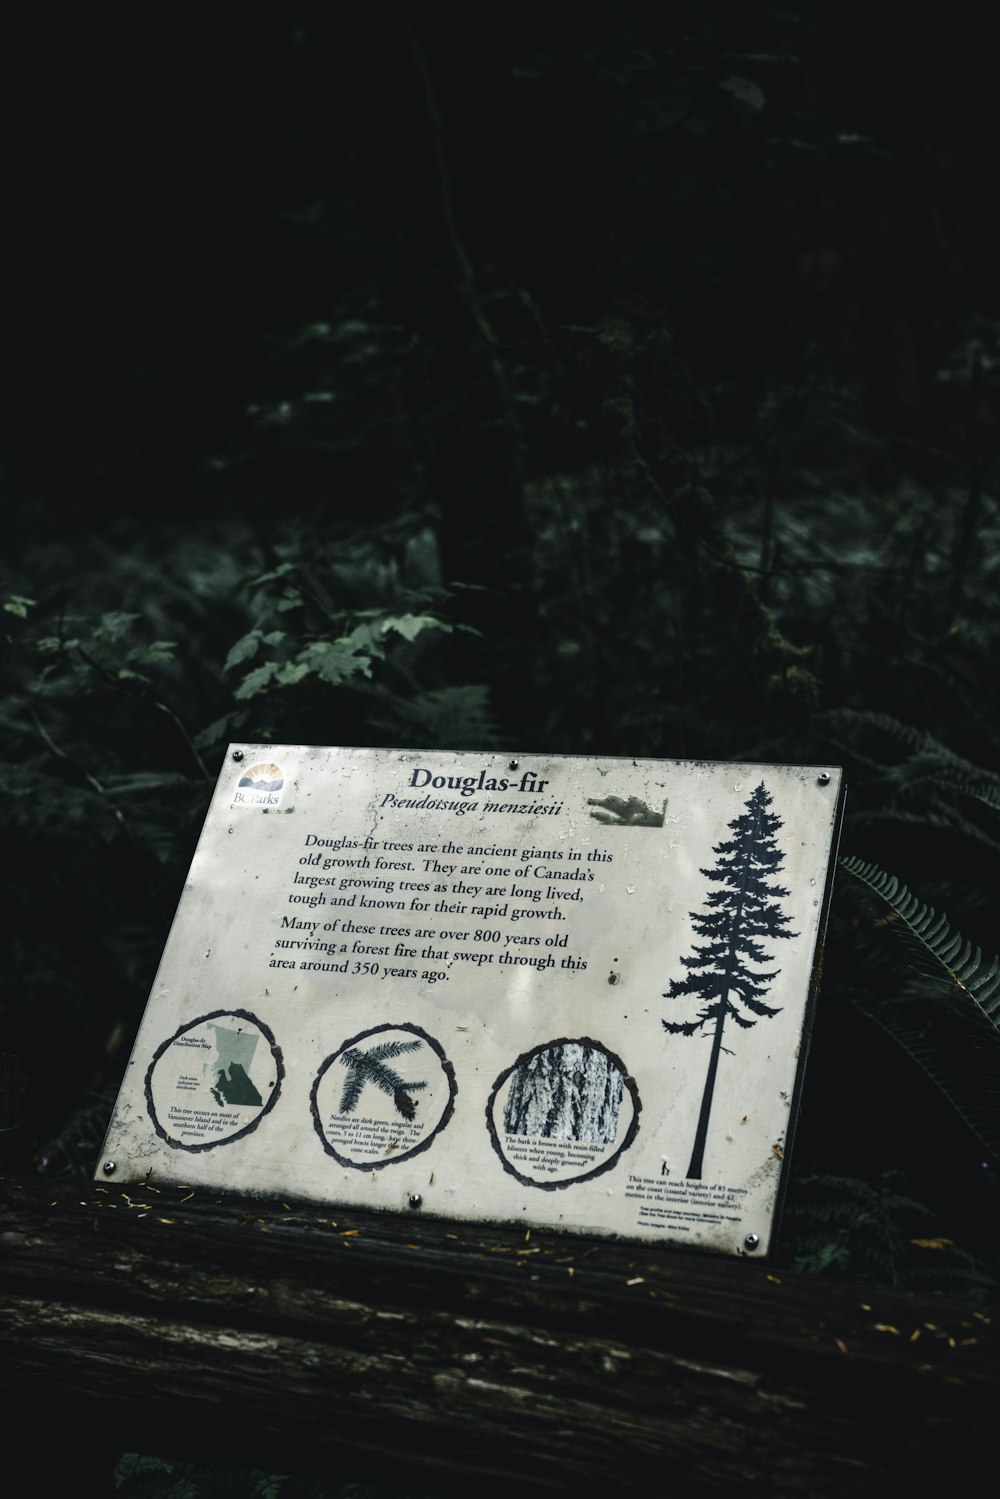 a sign on a log in the woods